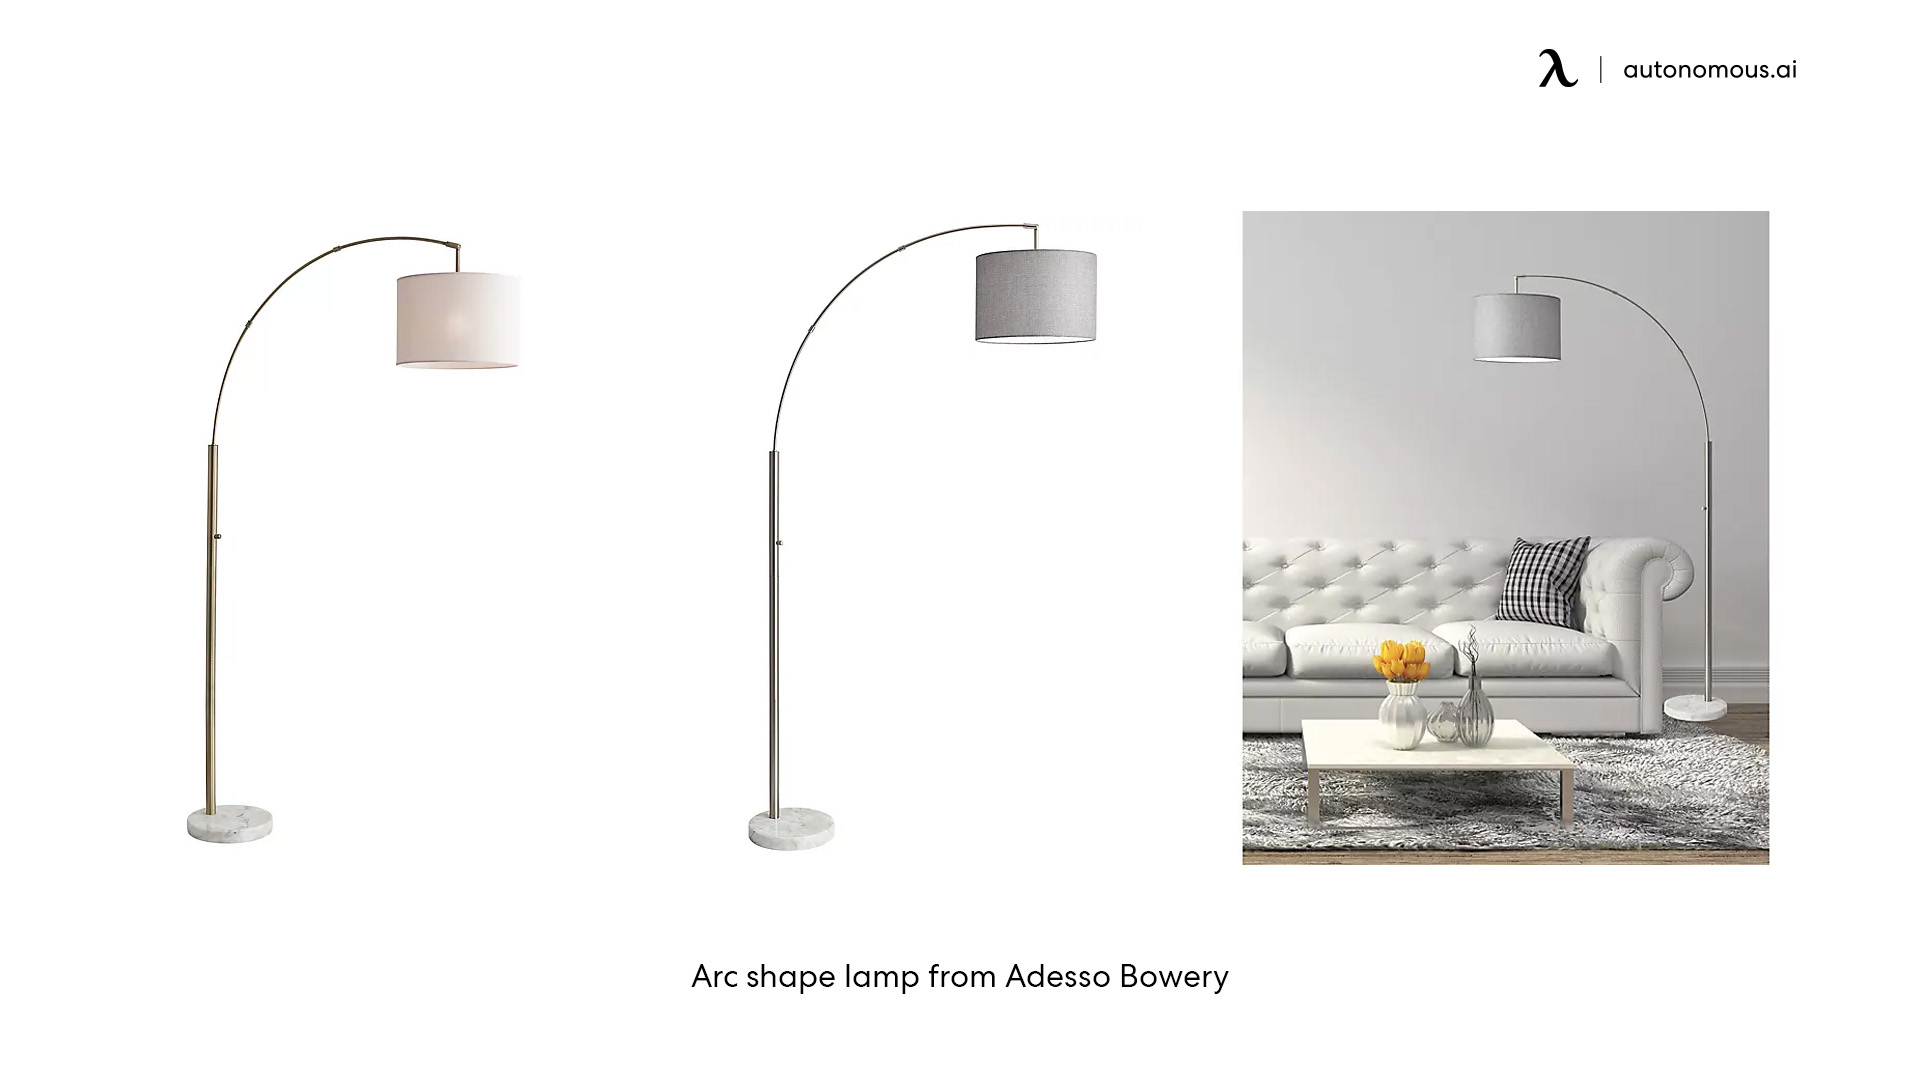 Arc shape lamp from Adesso Bowery